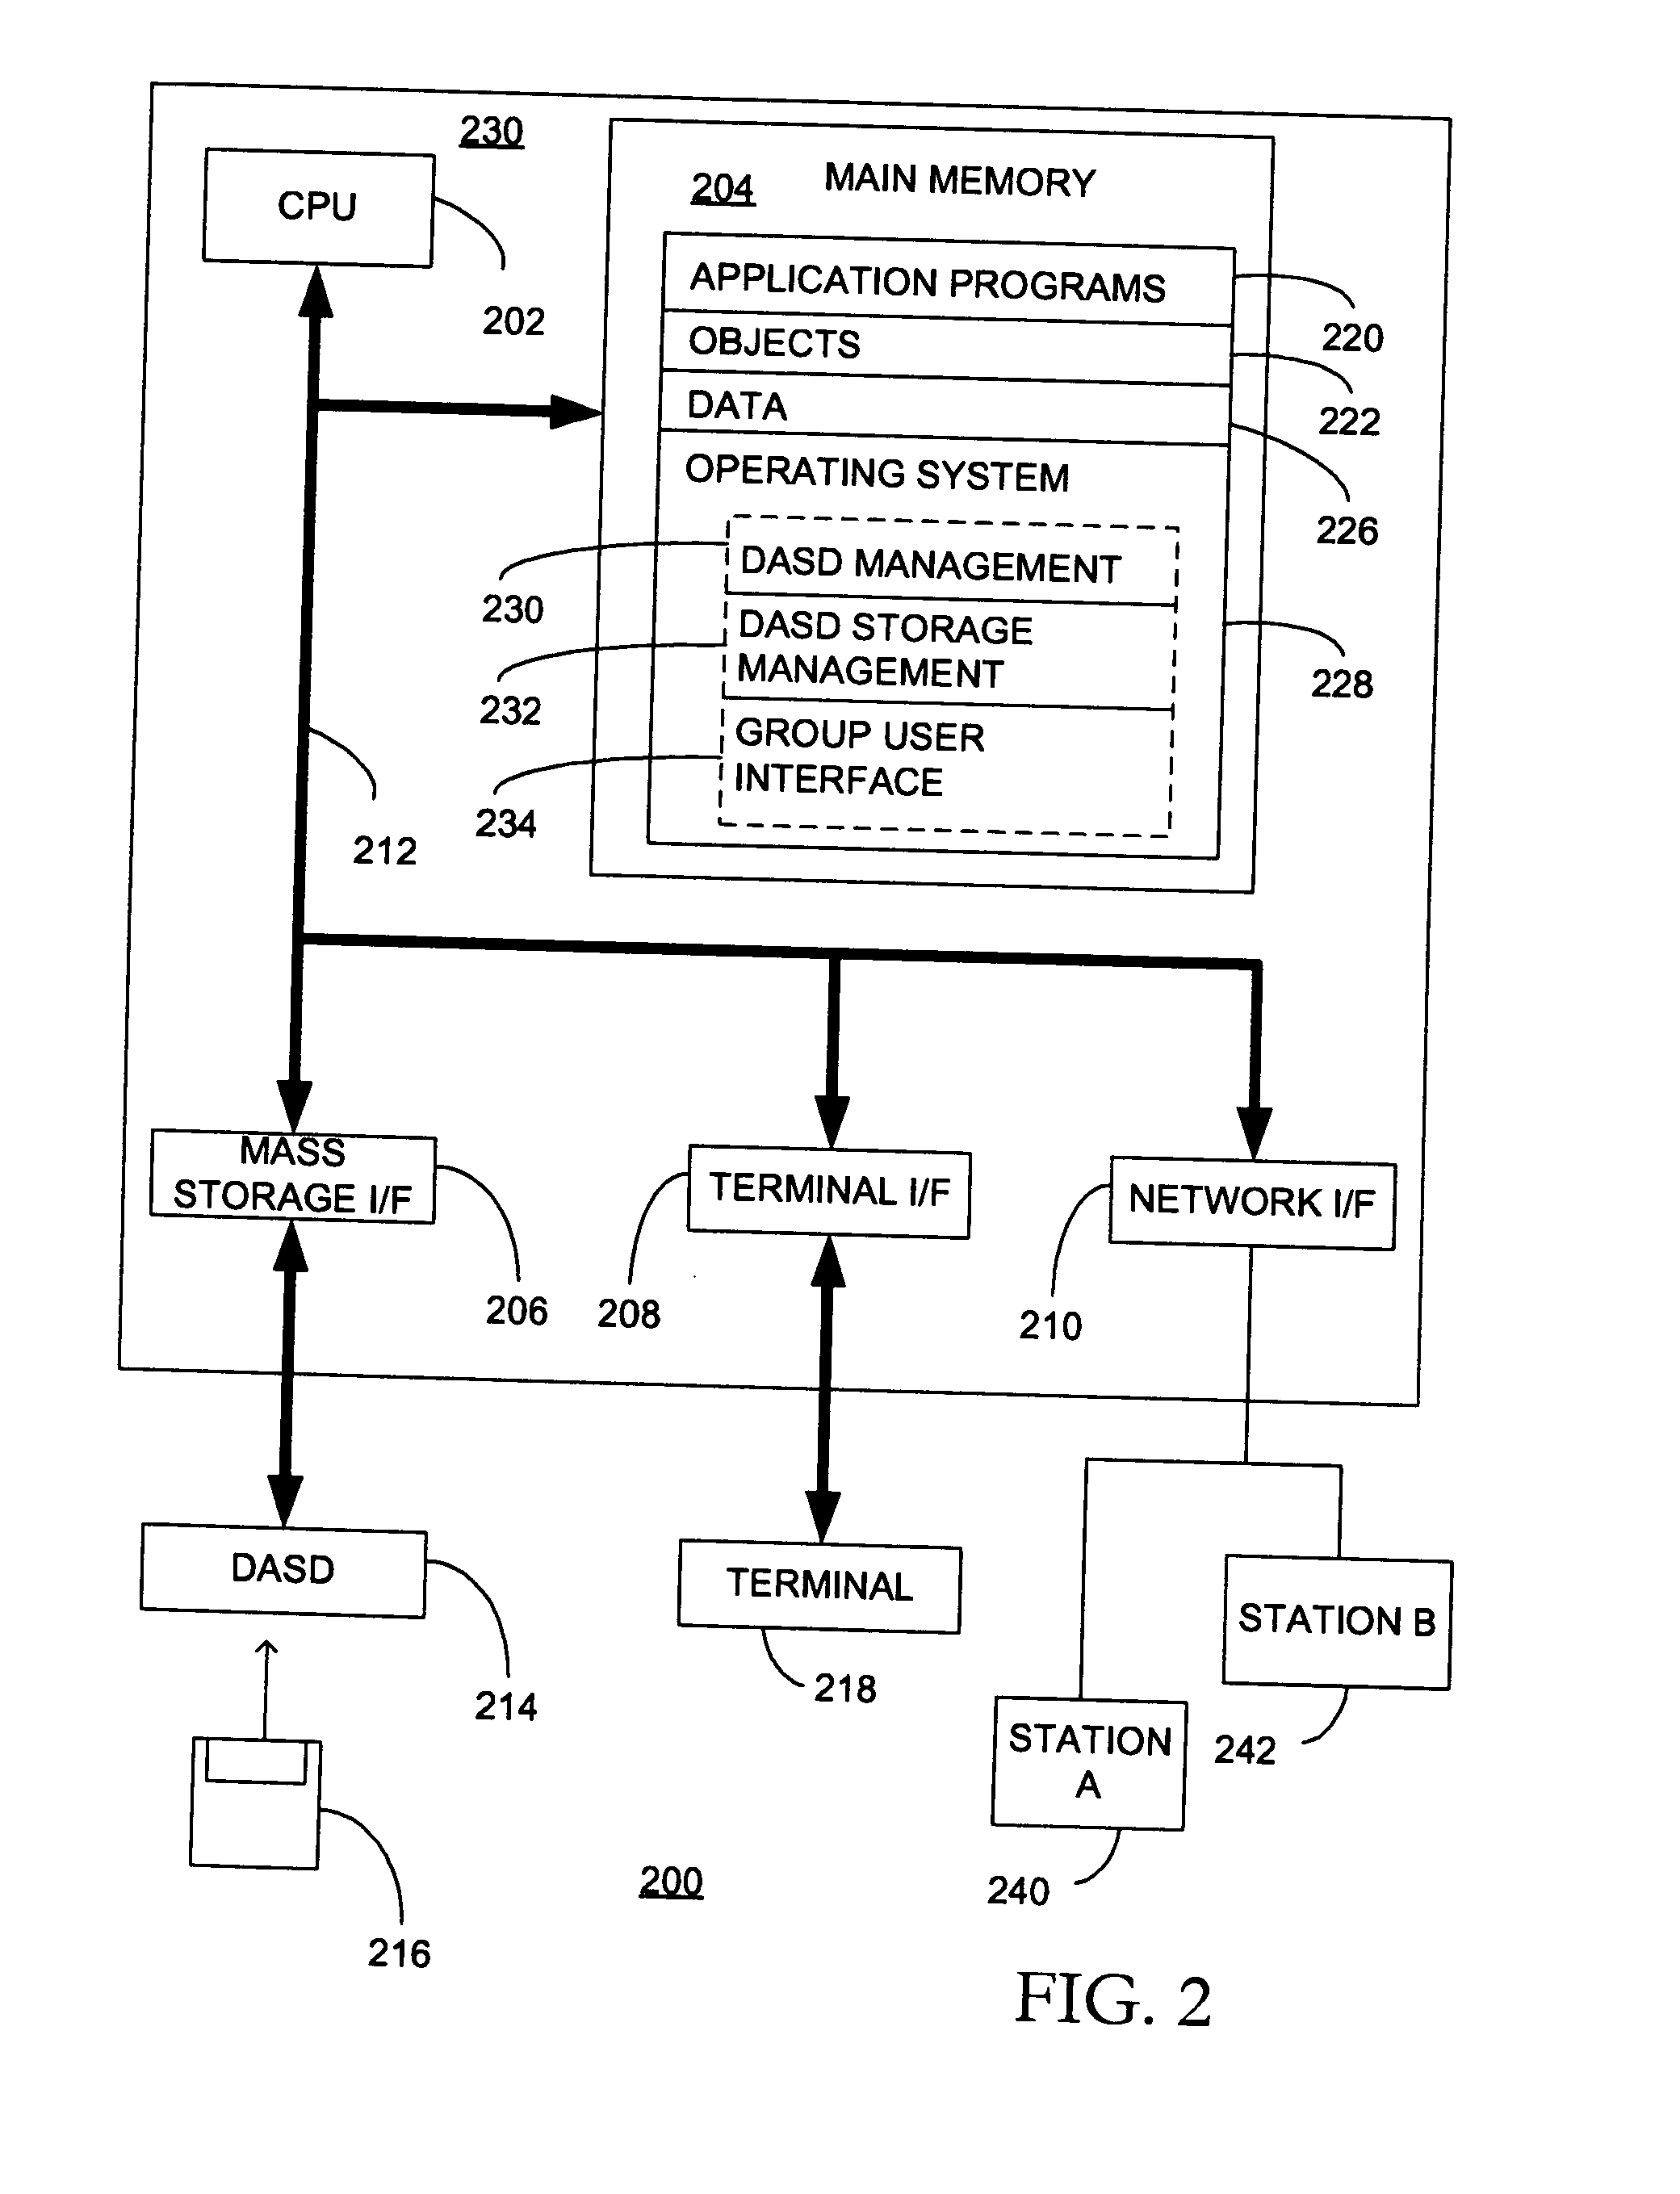 Method and apparatus for validating and ranking resources for geographic mirroring